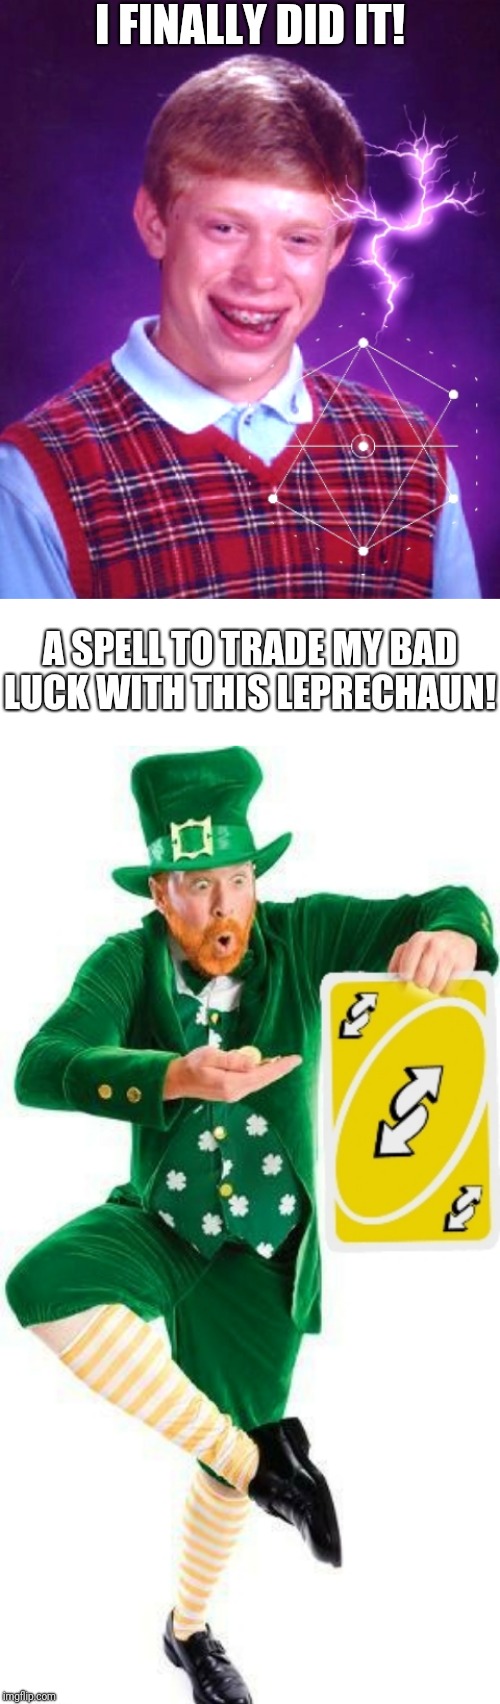 Did uno he wouldn't succeed? | I FINALLY DID IT! A SPELL TO TRADE MY BAD LUCK WITH THIS LEPRECHAUN! | image tagged in blank white template,bad luck brian,leprechaun,magic,funny memes,reverse card | made w/ Imgflip meme maker